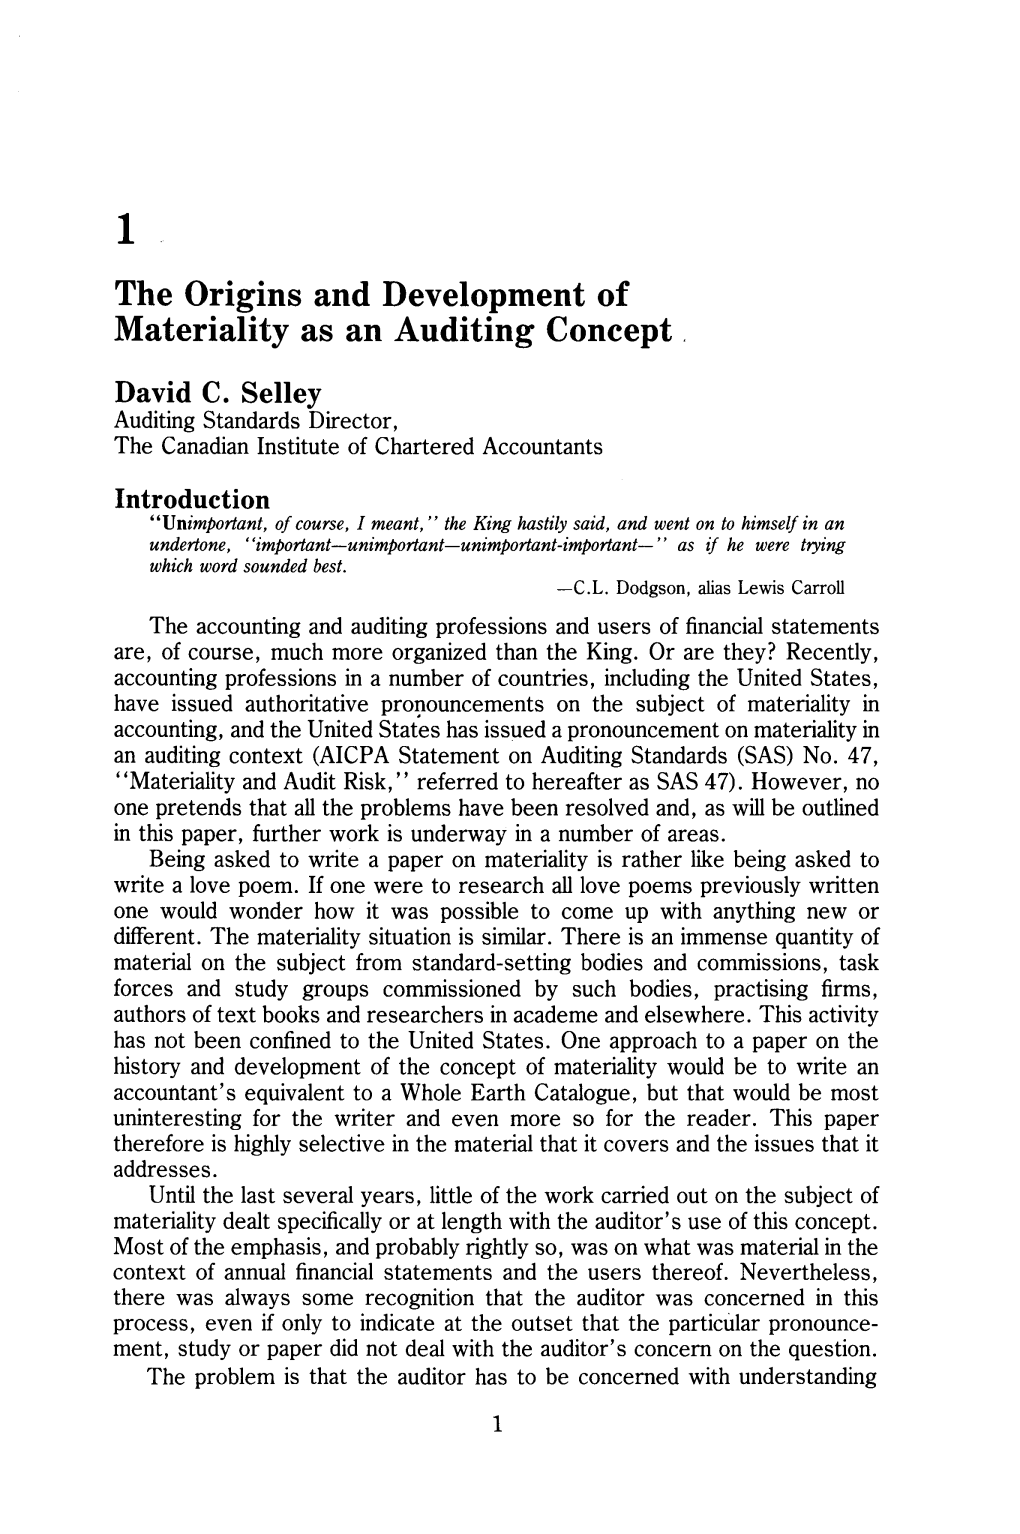 The Origins and Development of Materiality As an Auditing Concept